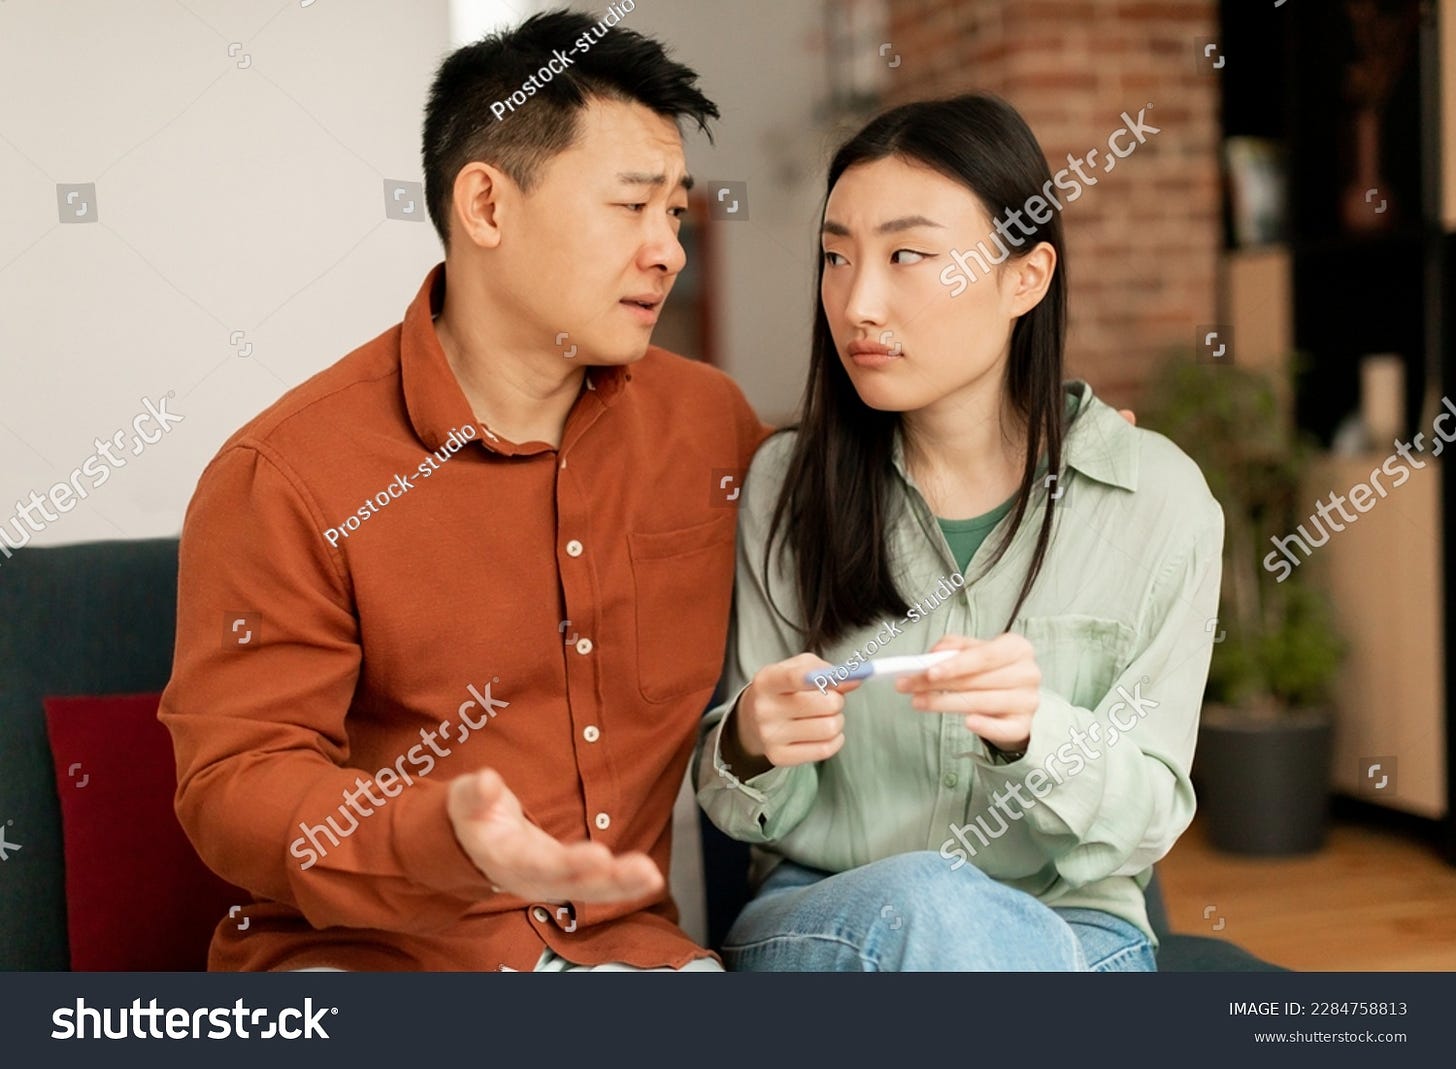 Depressed sad asian husband and wife upset of negative pregnancy test result, sitting on sofa in living room interior, copy space. Infertility, health problems and childlessness